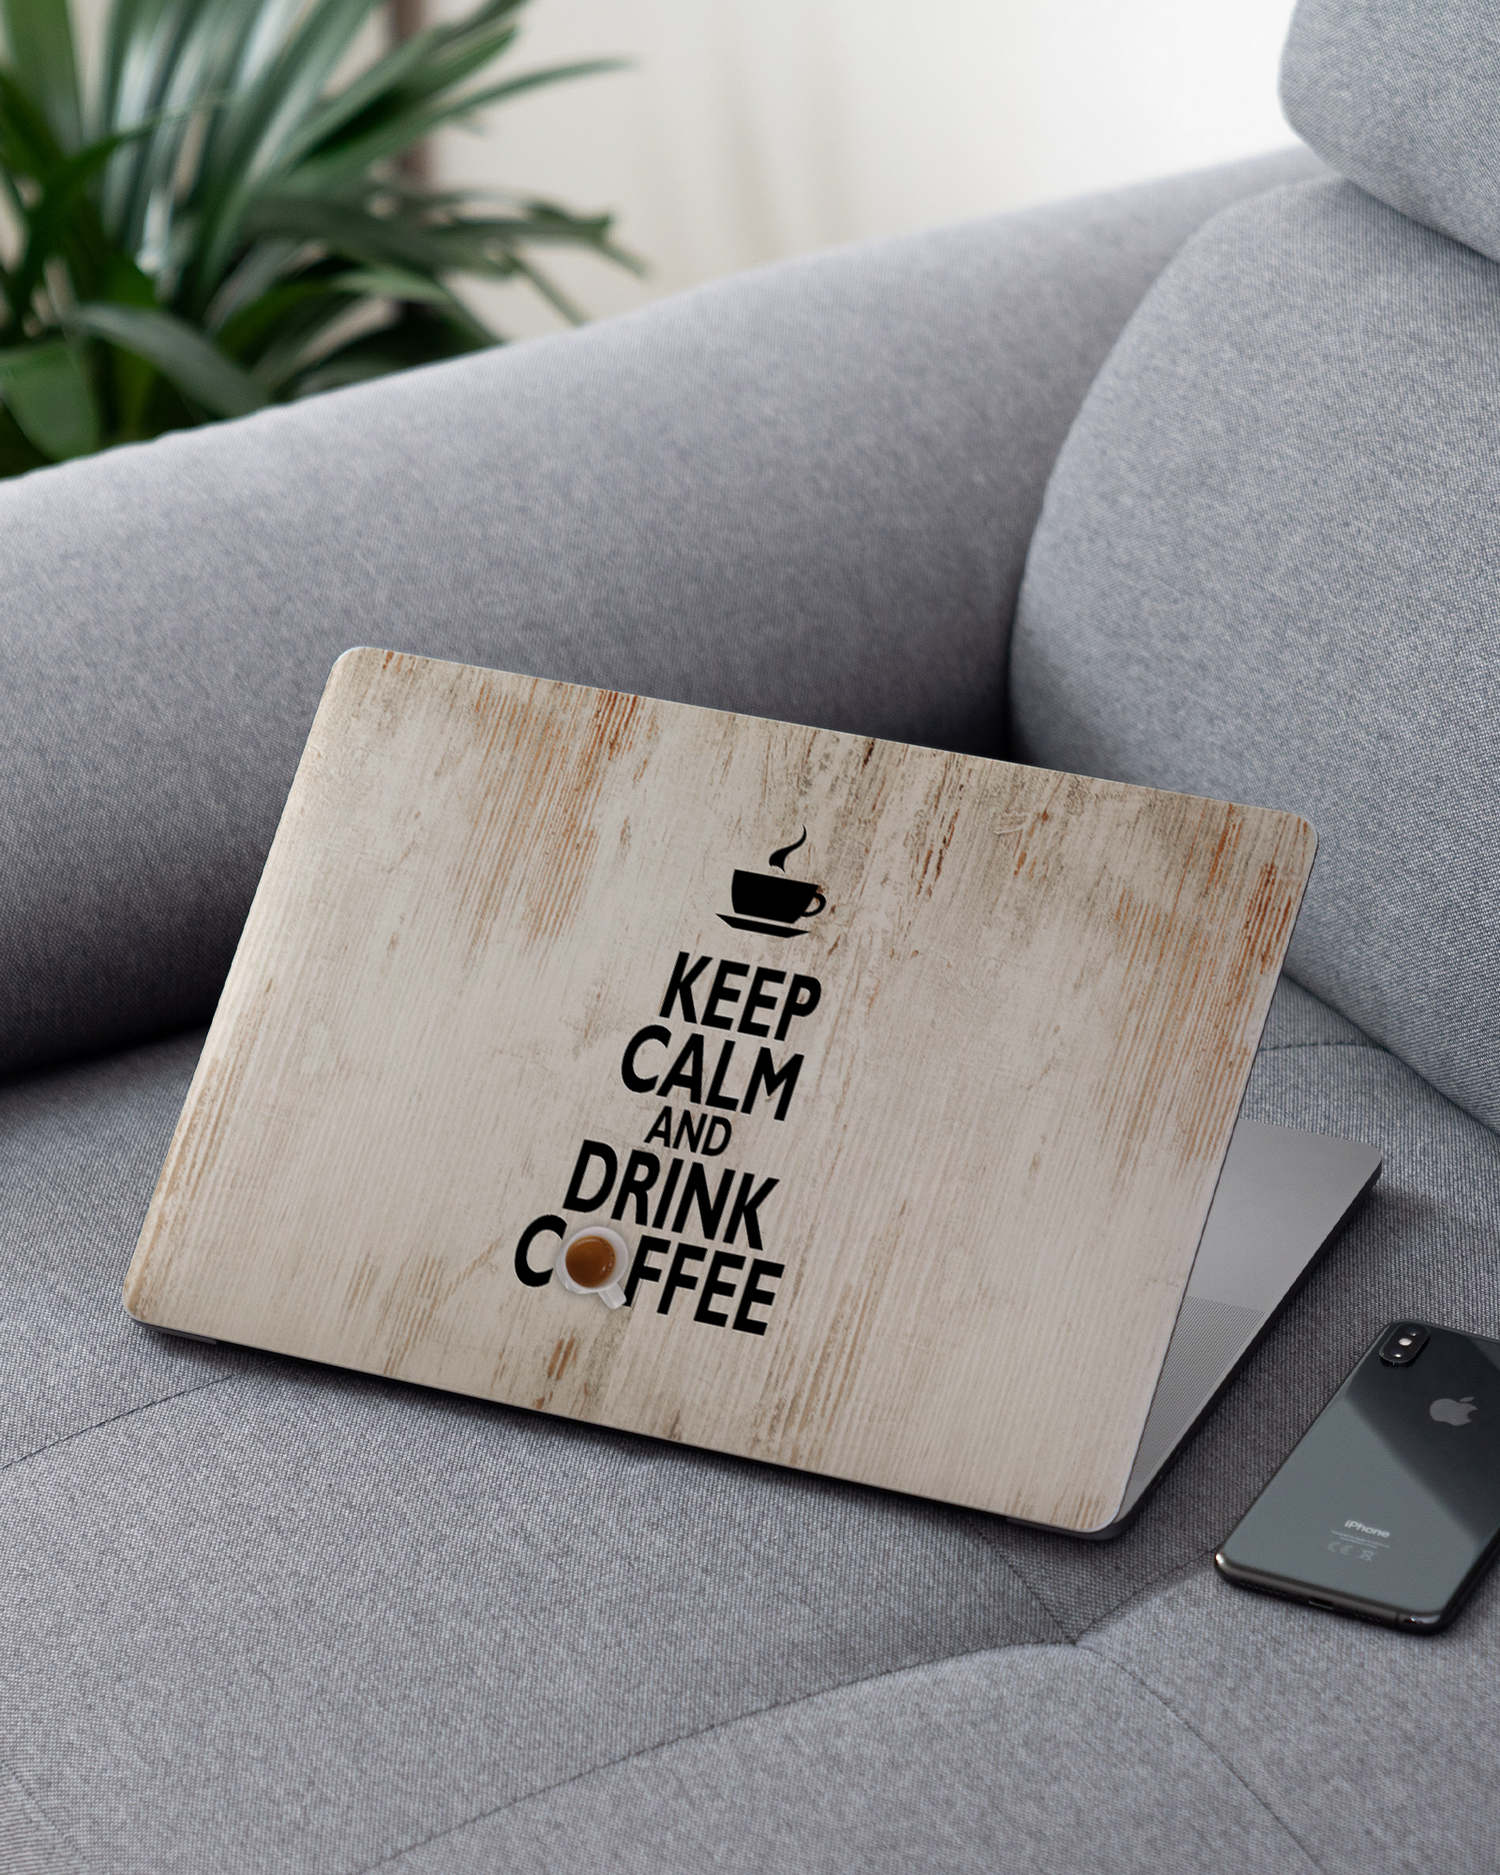 Drink Coffee Laptop Skin for 13 inch Apple MacBooks on a couch